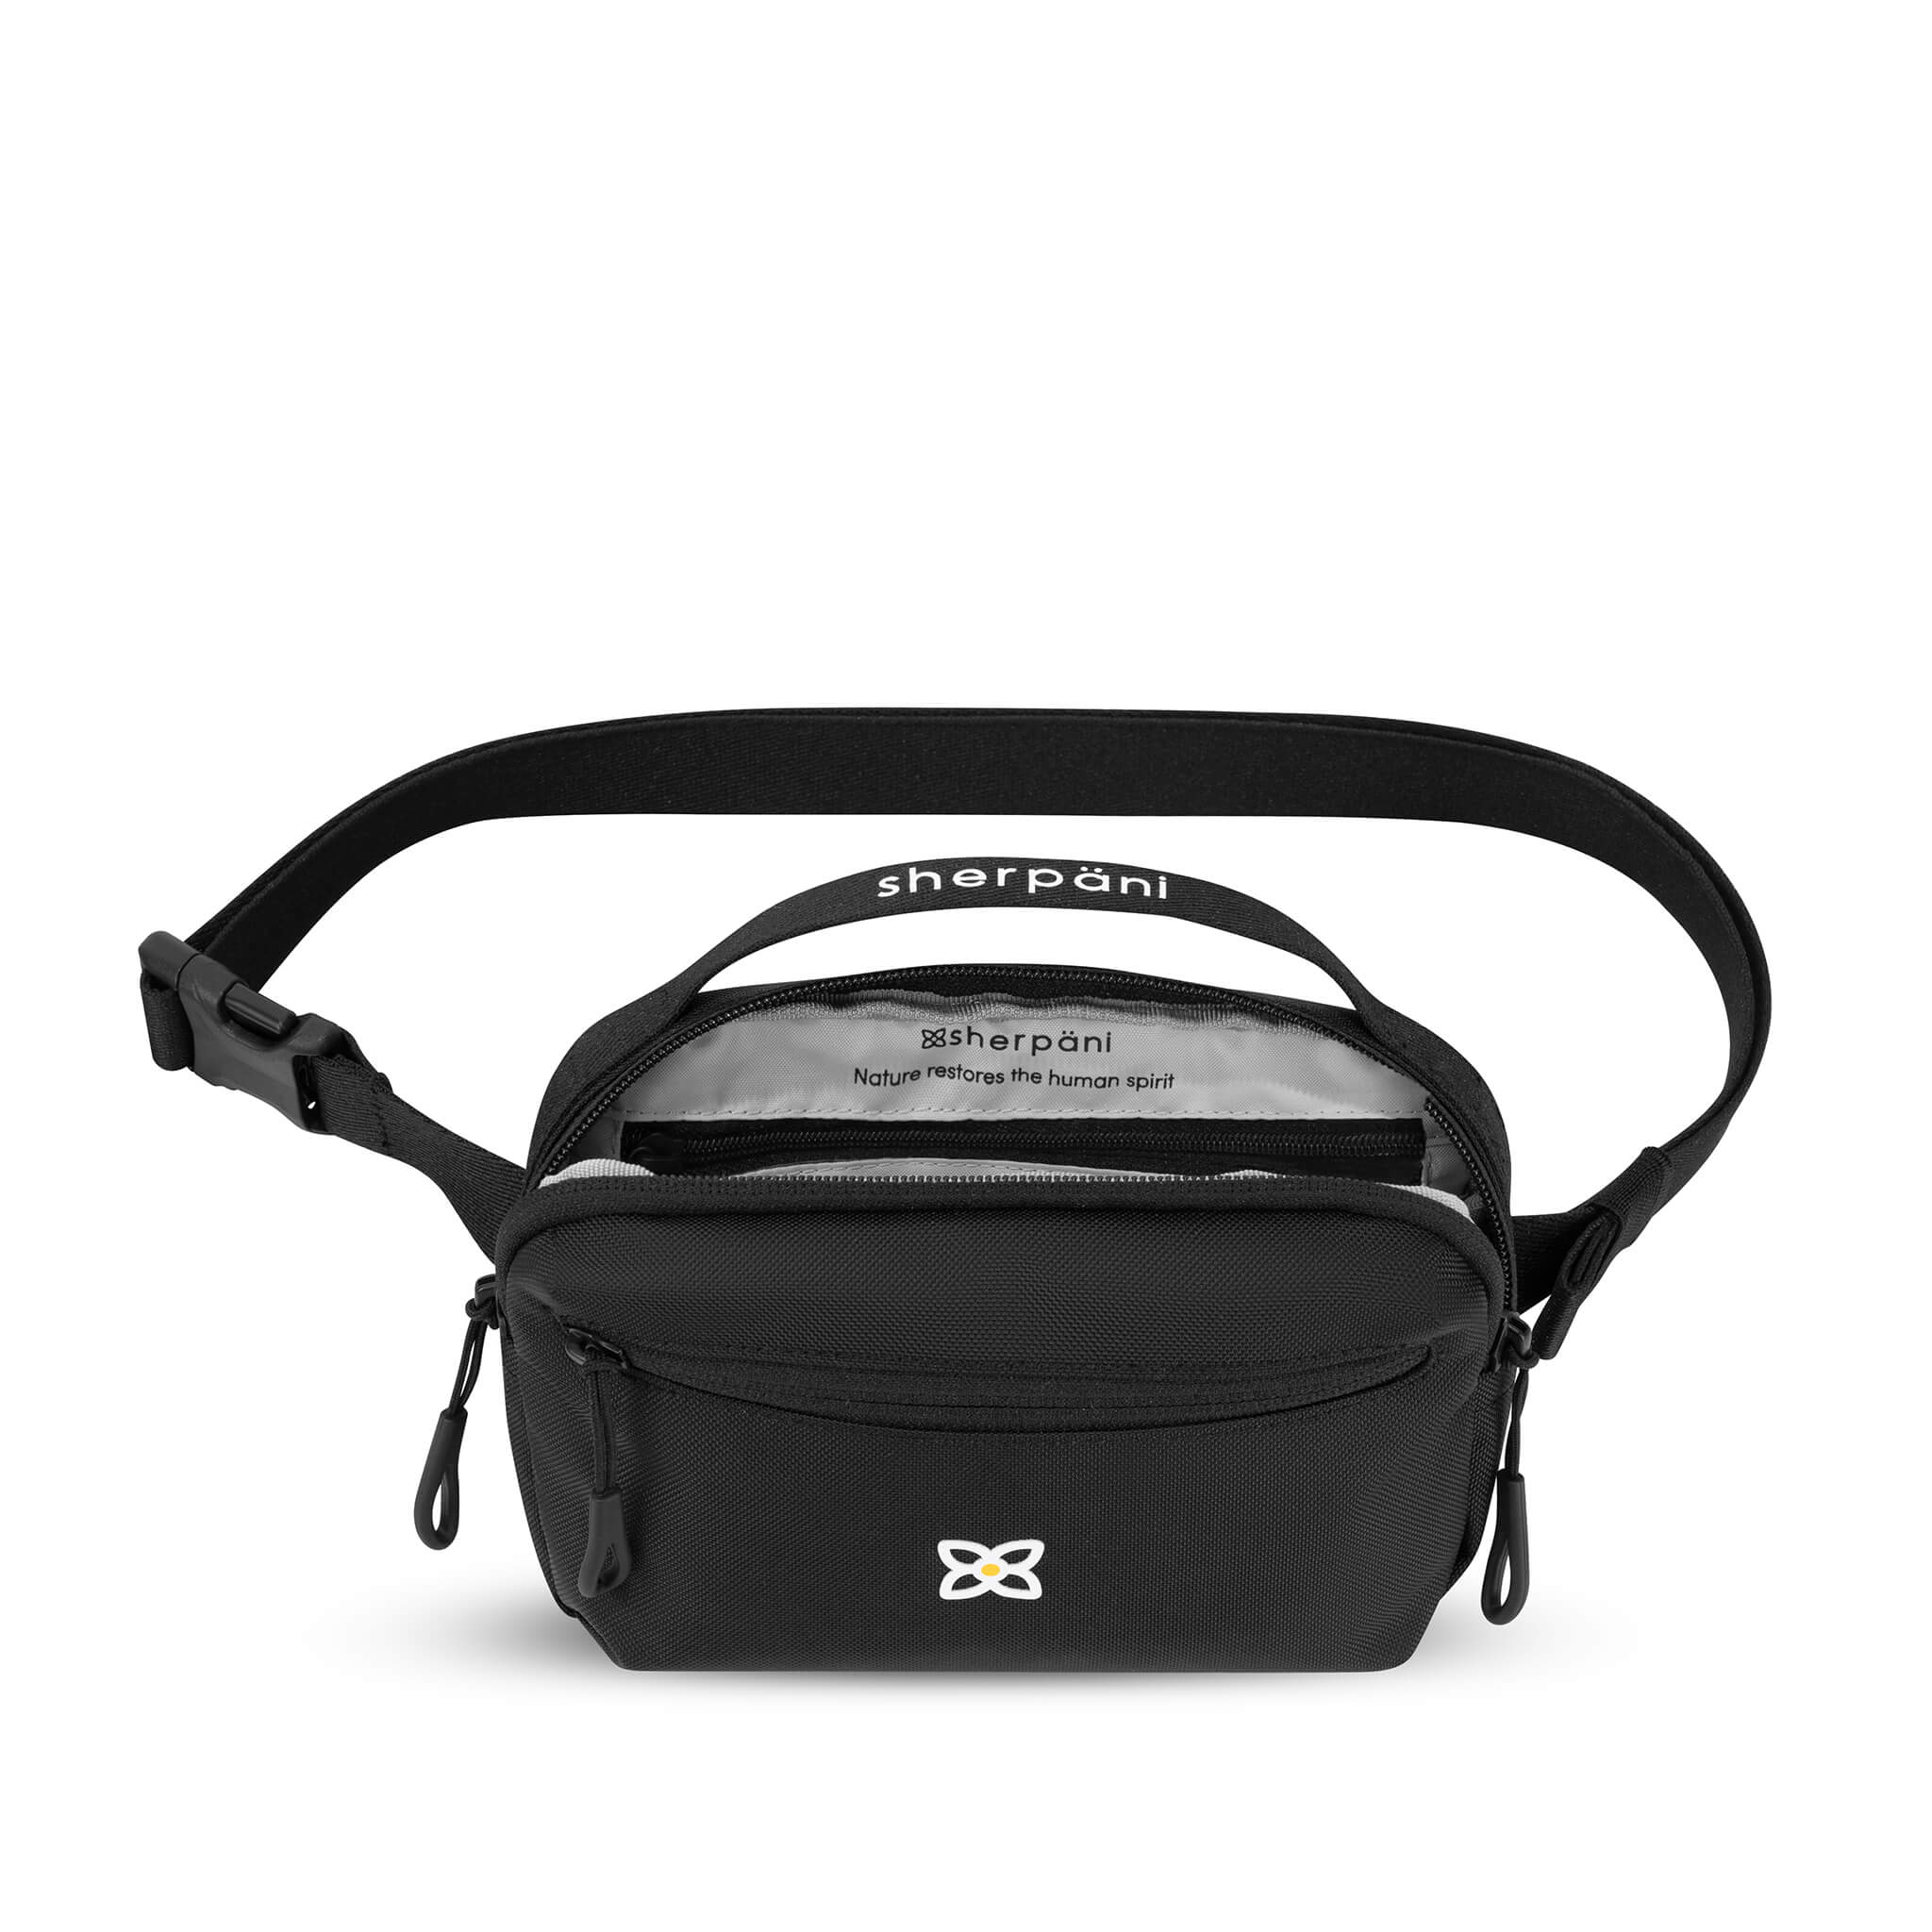 Top view of Sherpani&#39;s waist pack, the Hyk in Raven. The main bag compartment is open to reveal a light gray interior and inside zipper pocket.